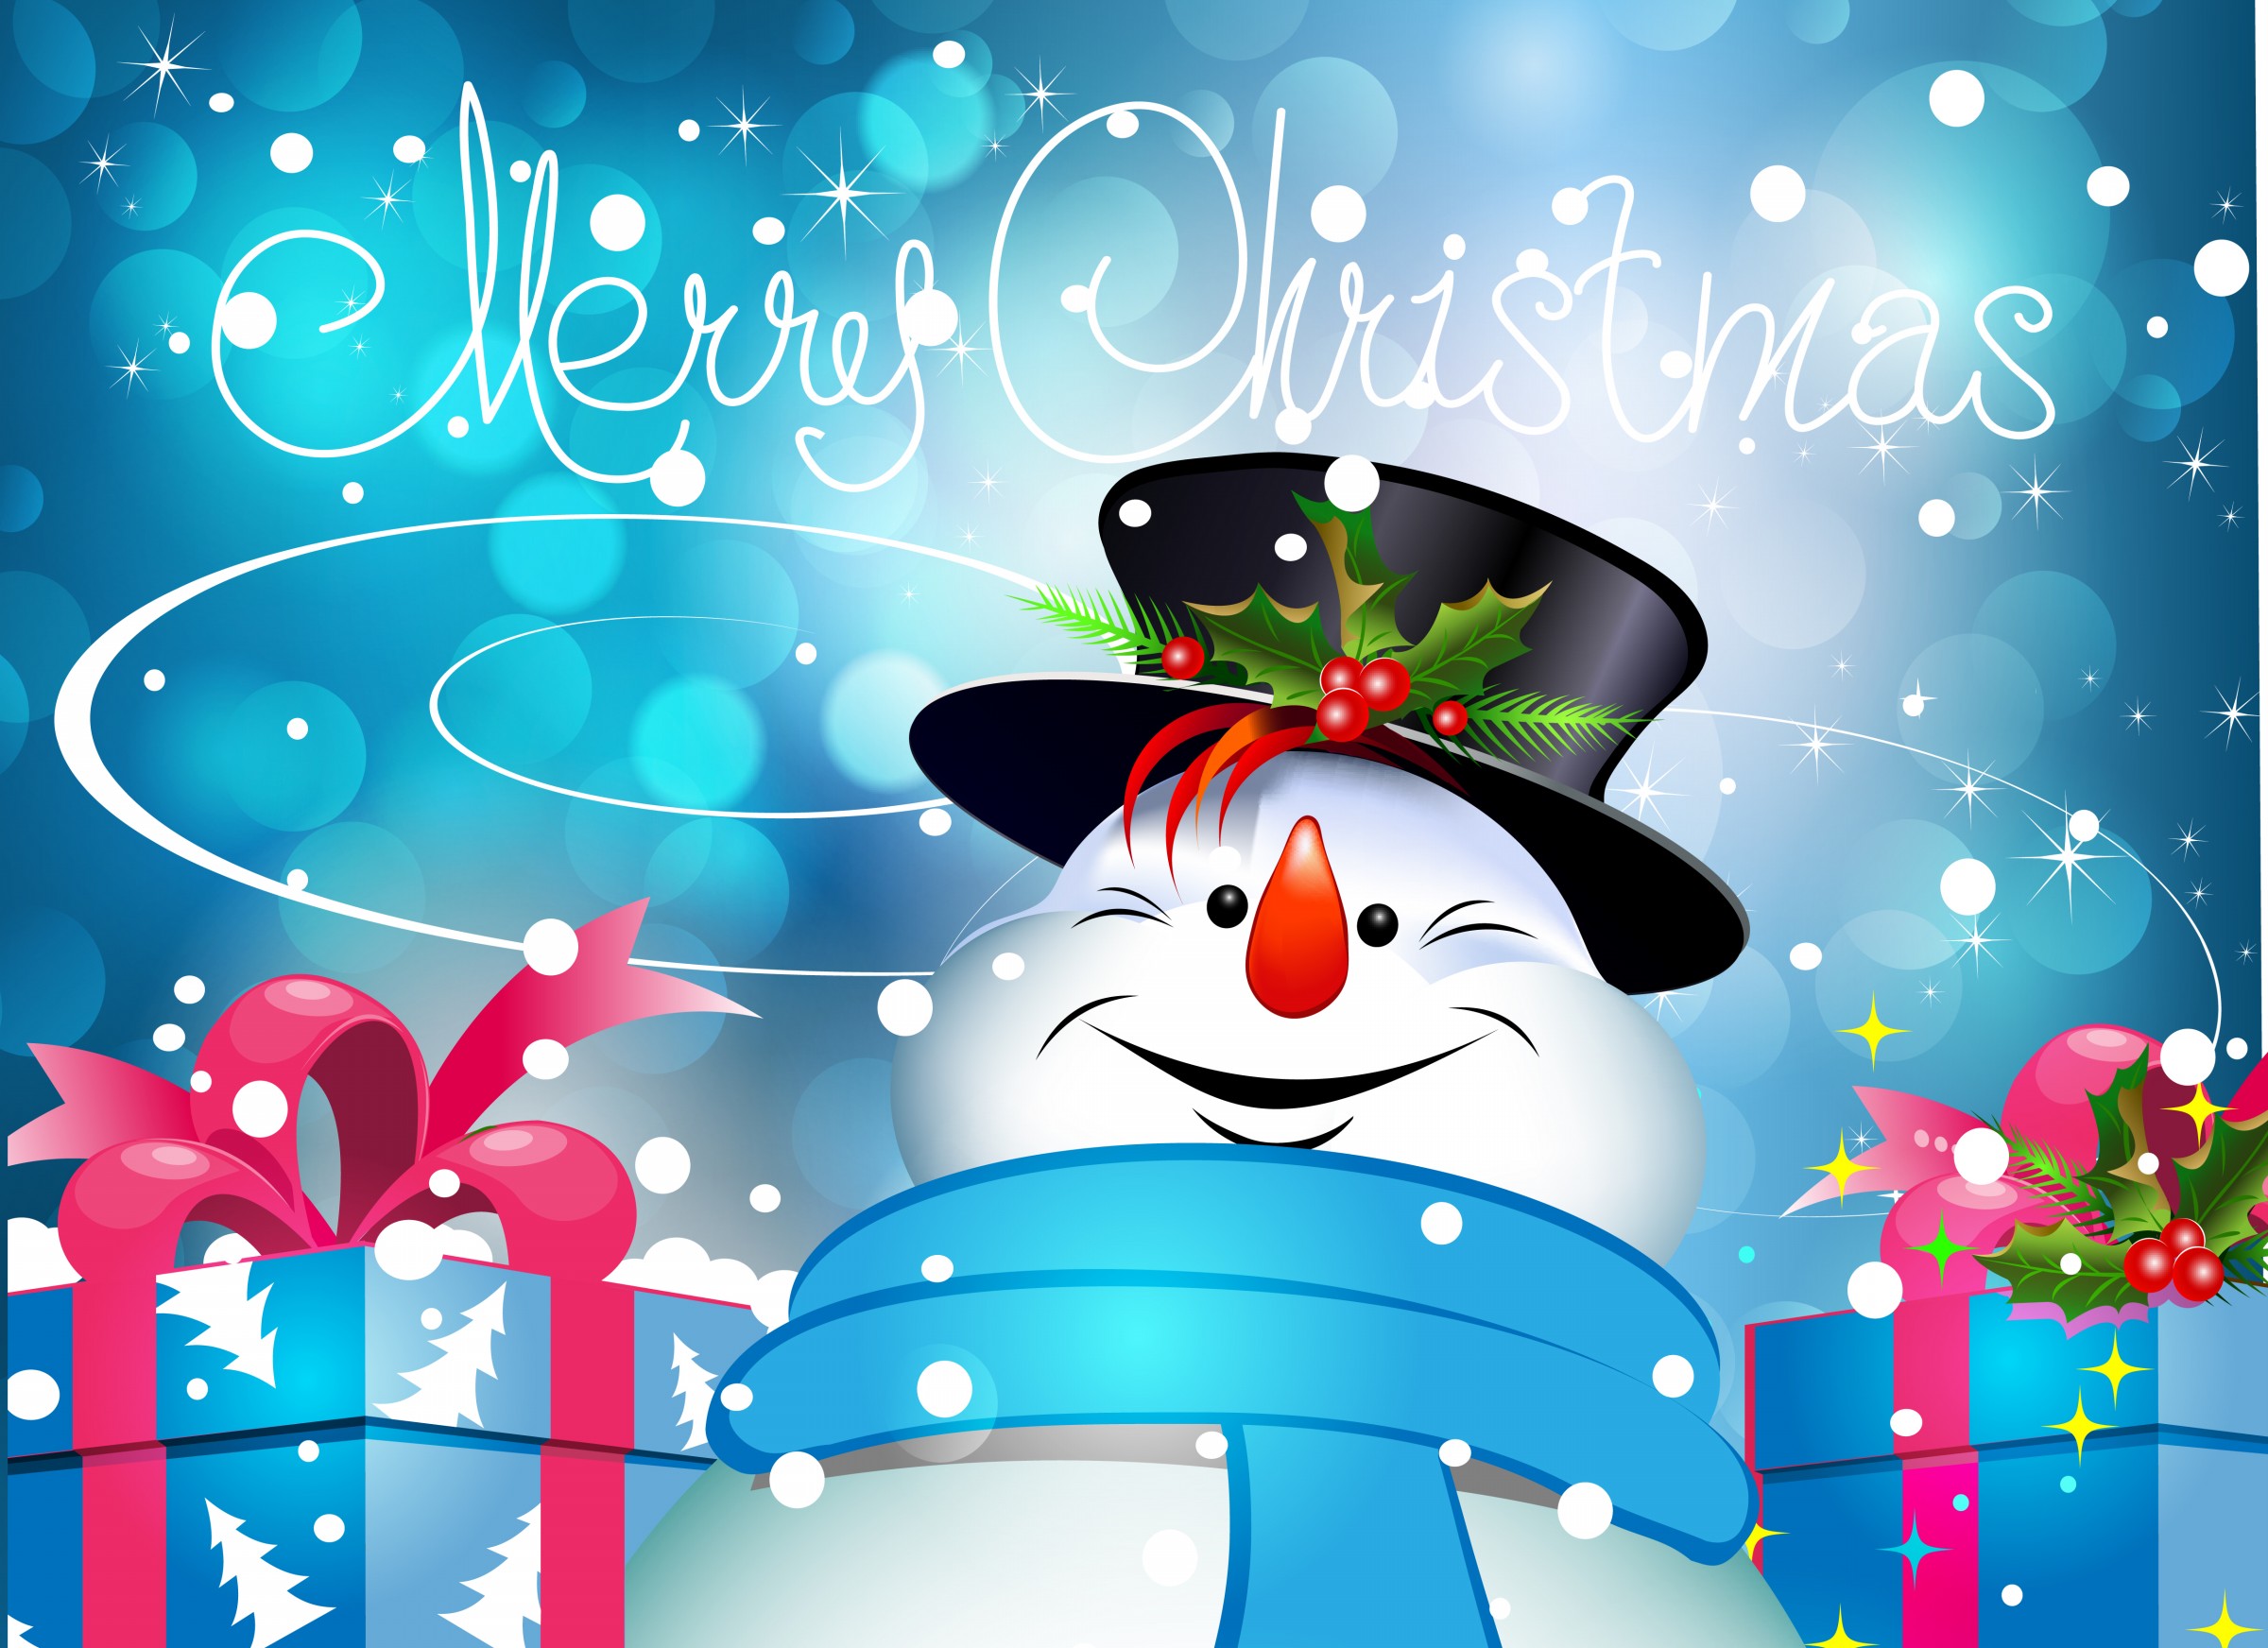 Christmas Greeting 2014 Wallpaper Picture #11126 Wallpaper | High ...